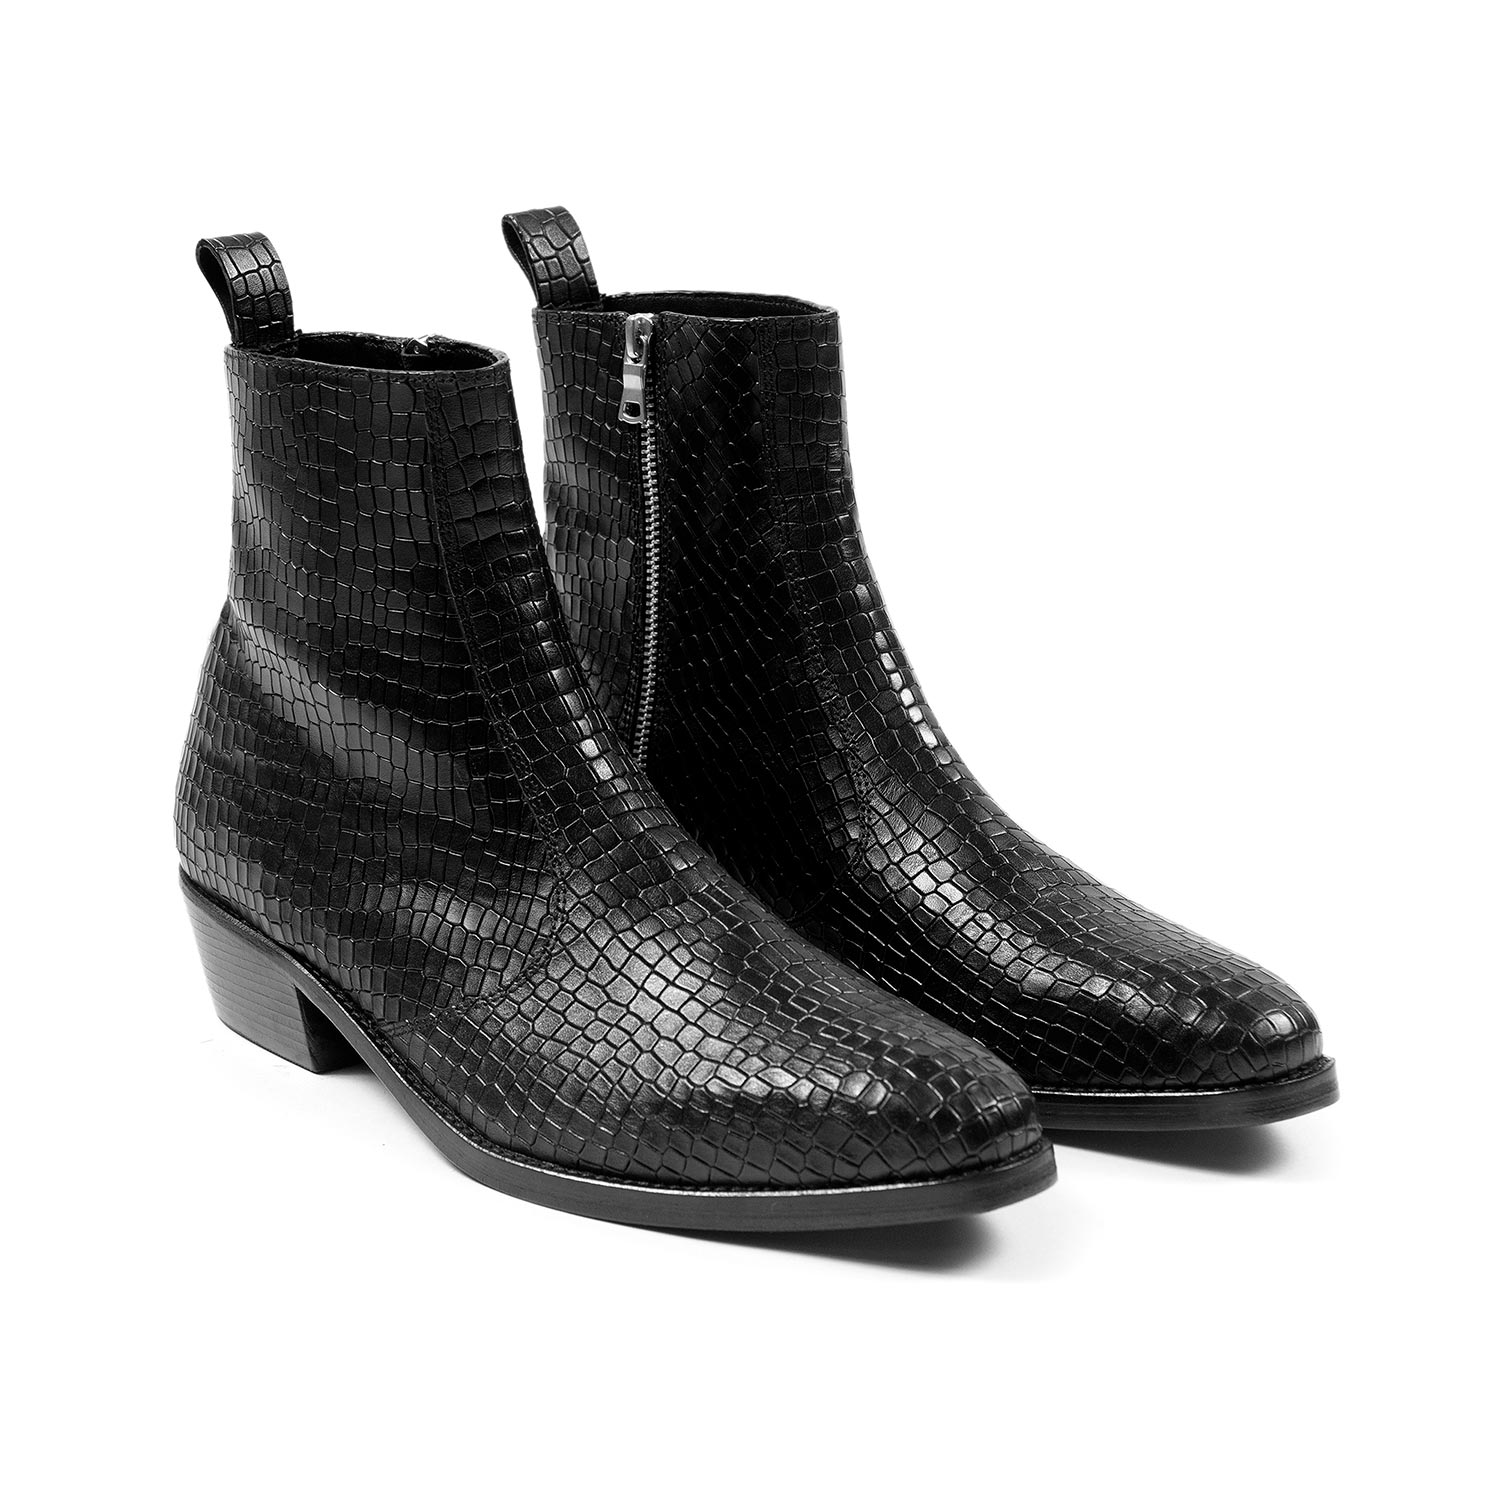 Richards - Black Snakeskin (Size 7.5) | Straight To Hell Apparel